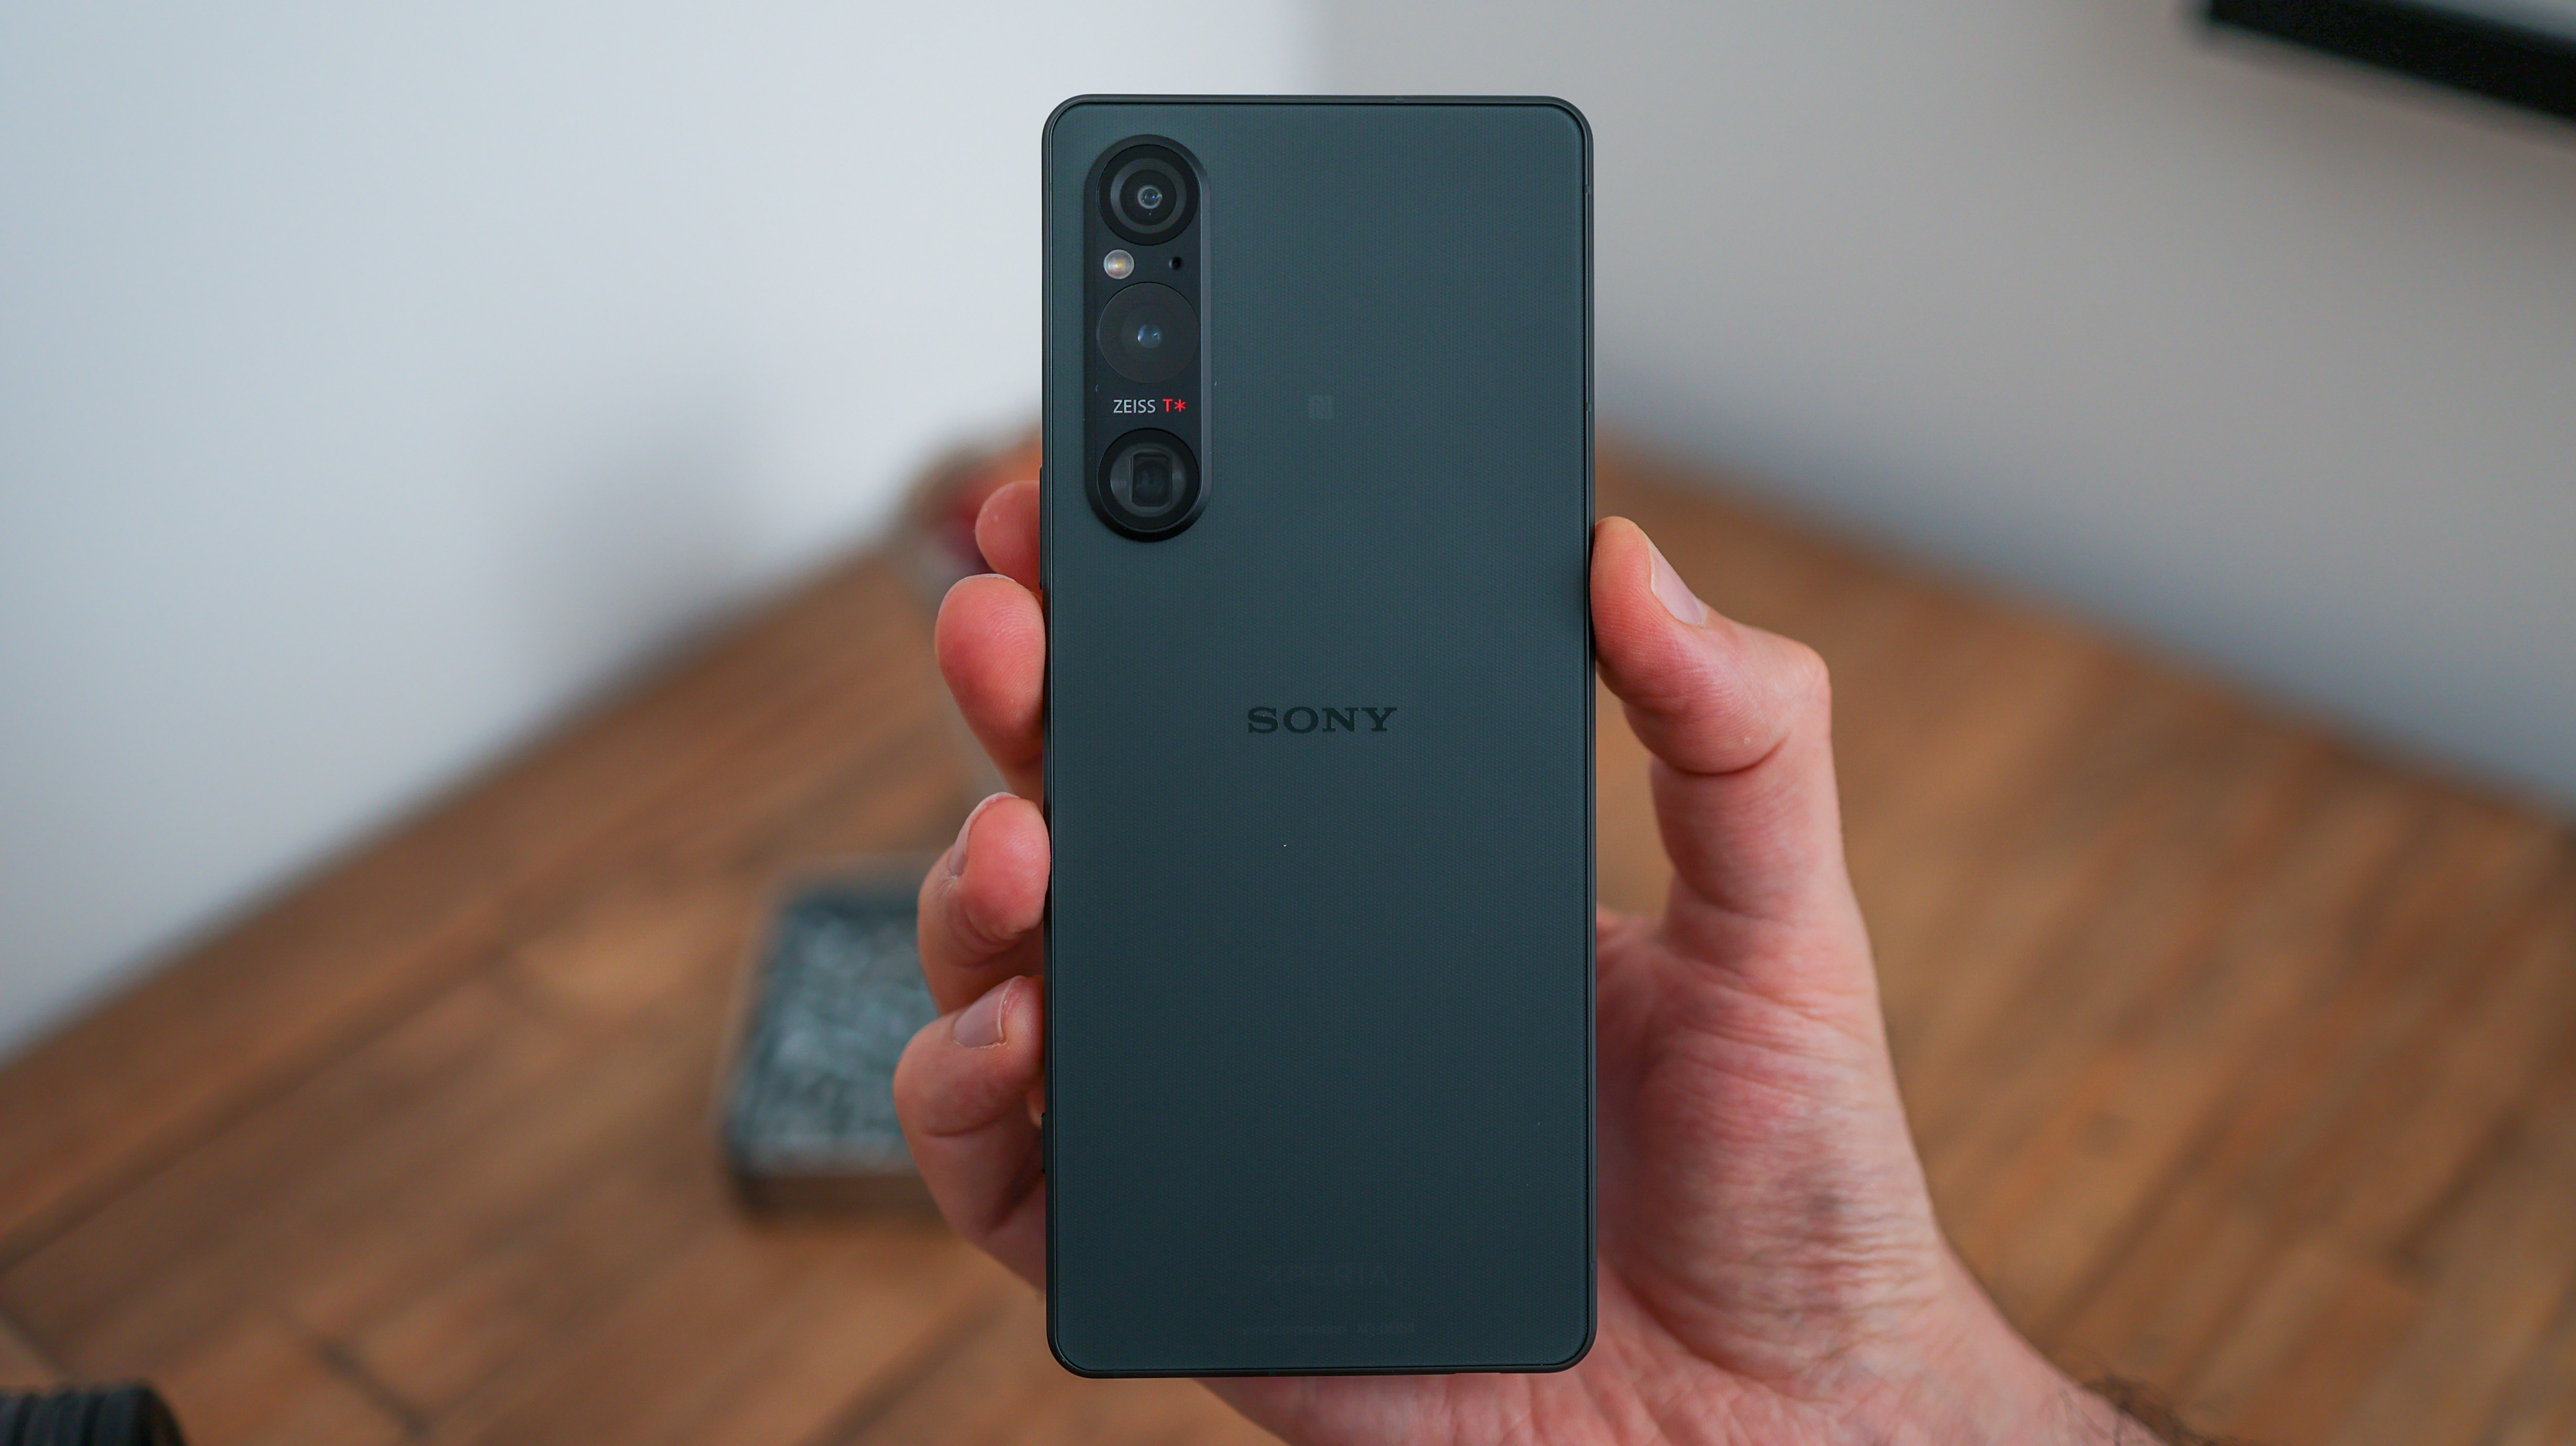 Sony Xperia 1 V review: the good, the niche and the pricey | T3